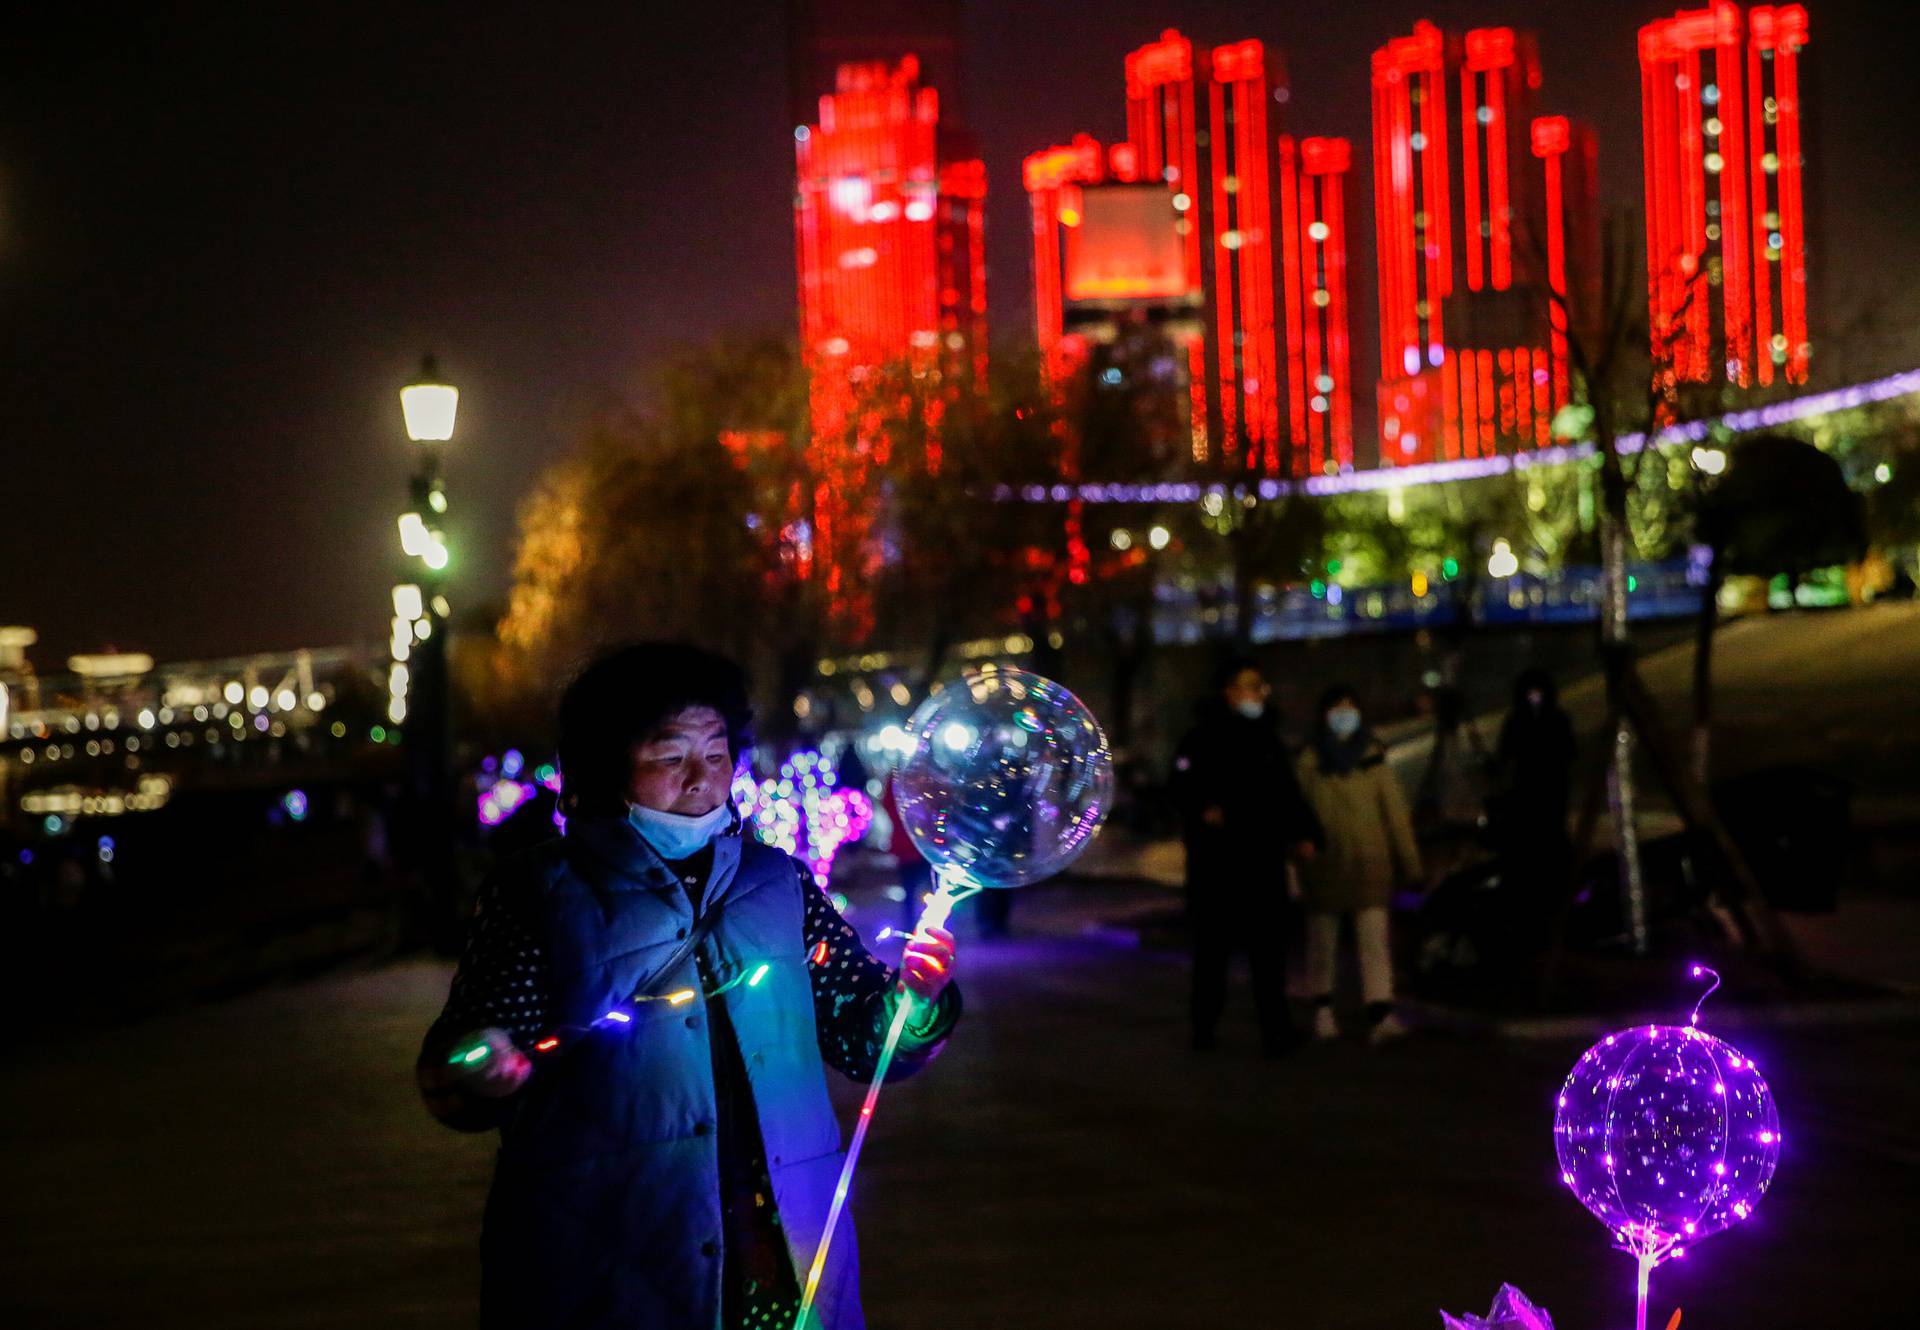 Vendor decorates a balloon for sale by a river on New Year's Eve in Wuhan